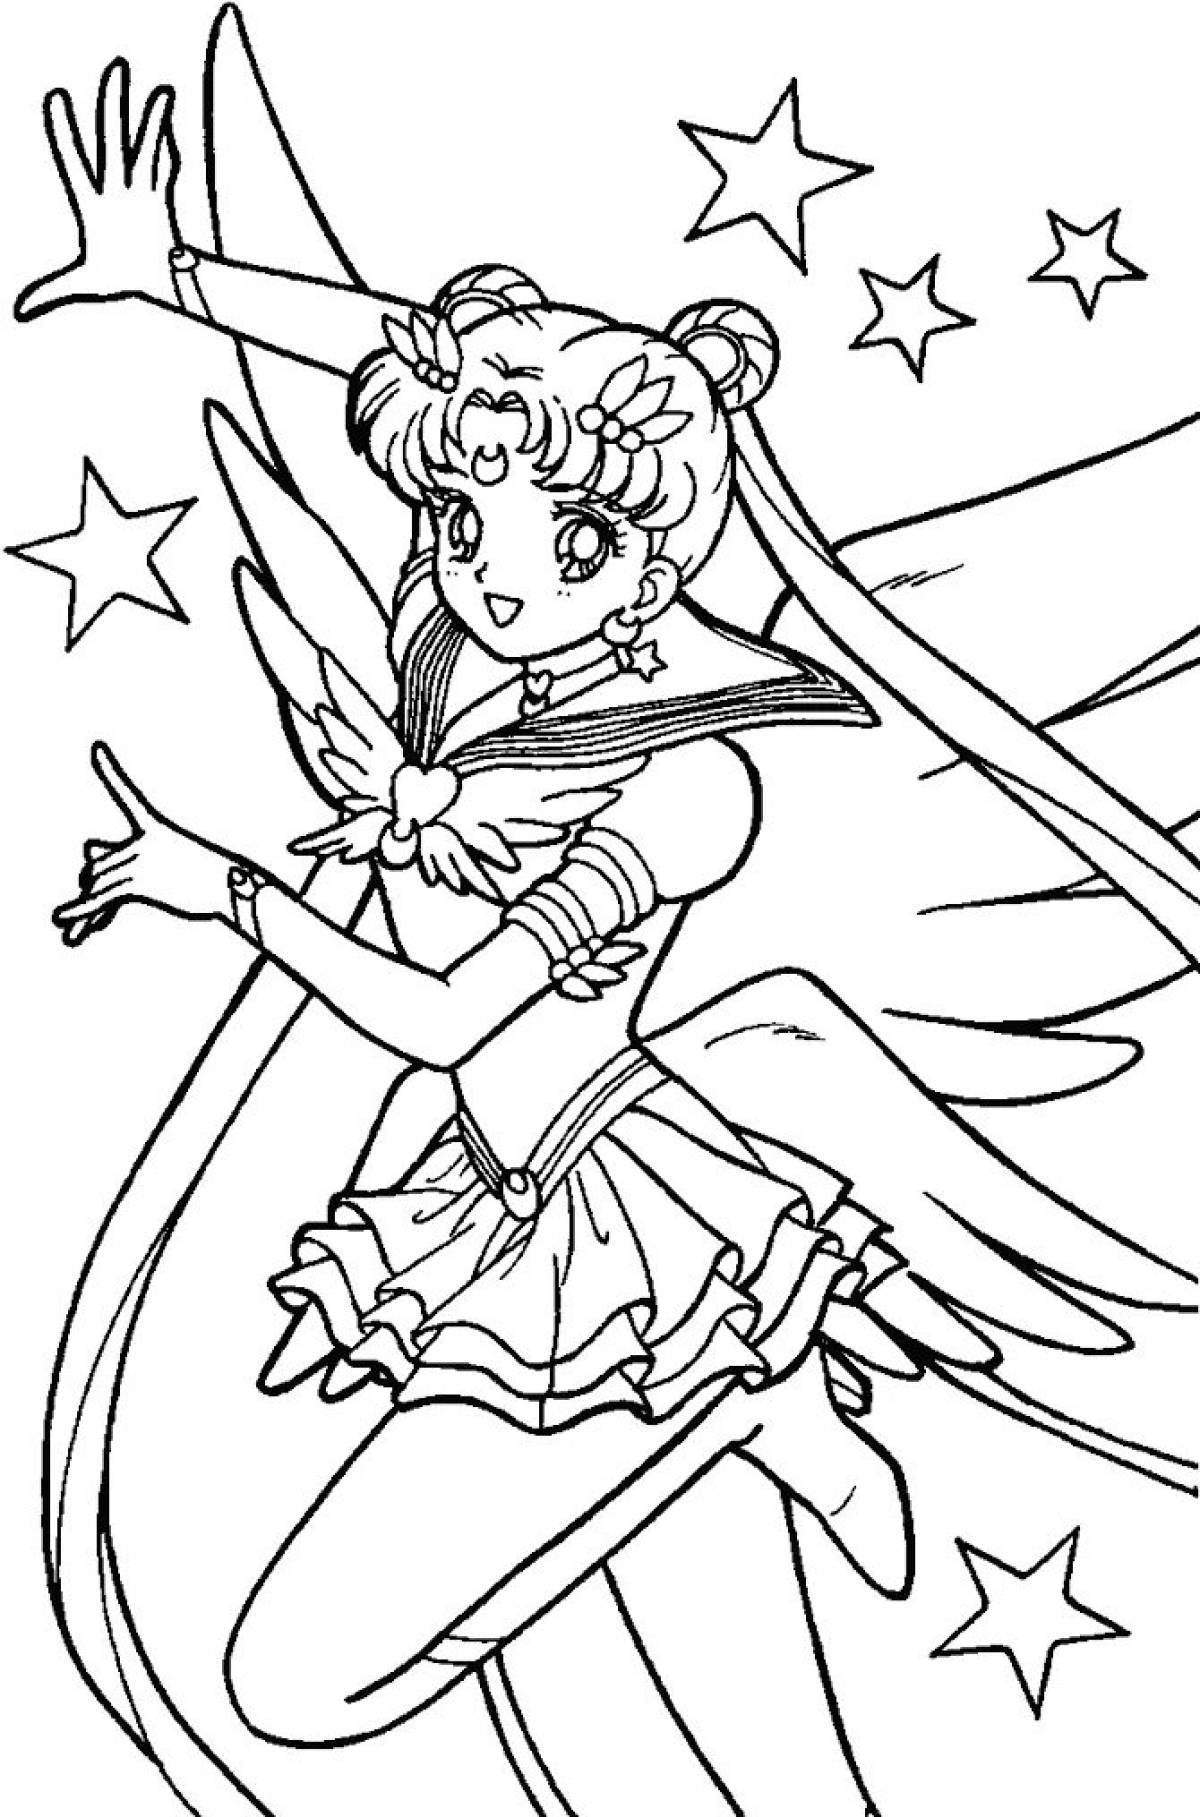 Sailor moon touching coloring book